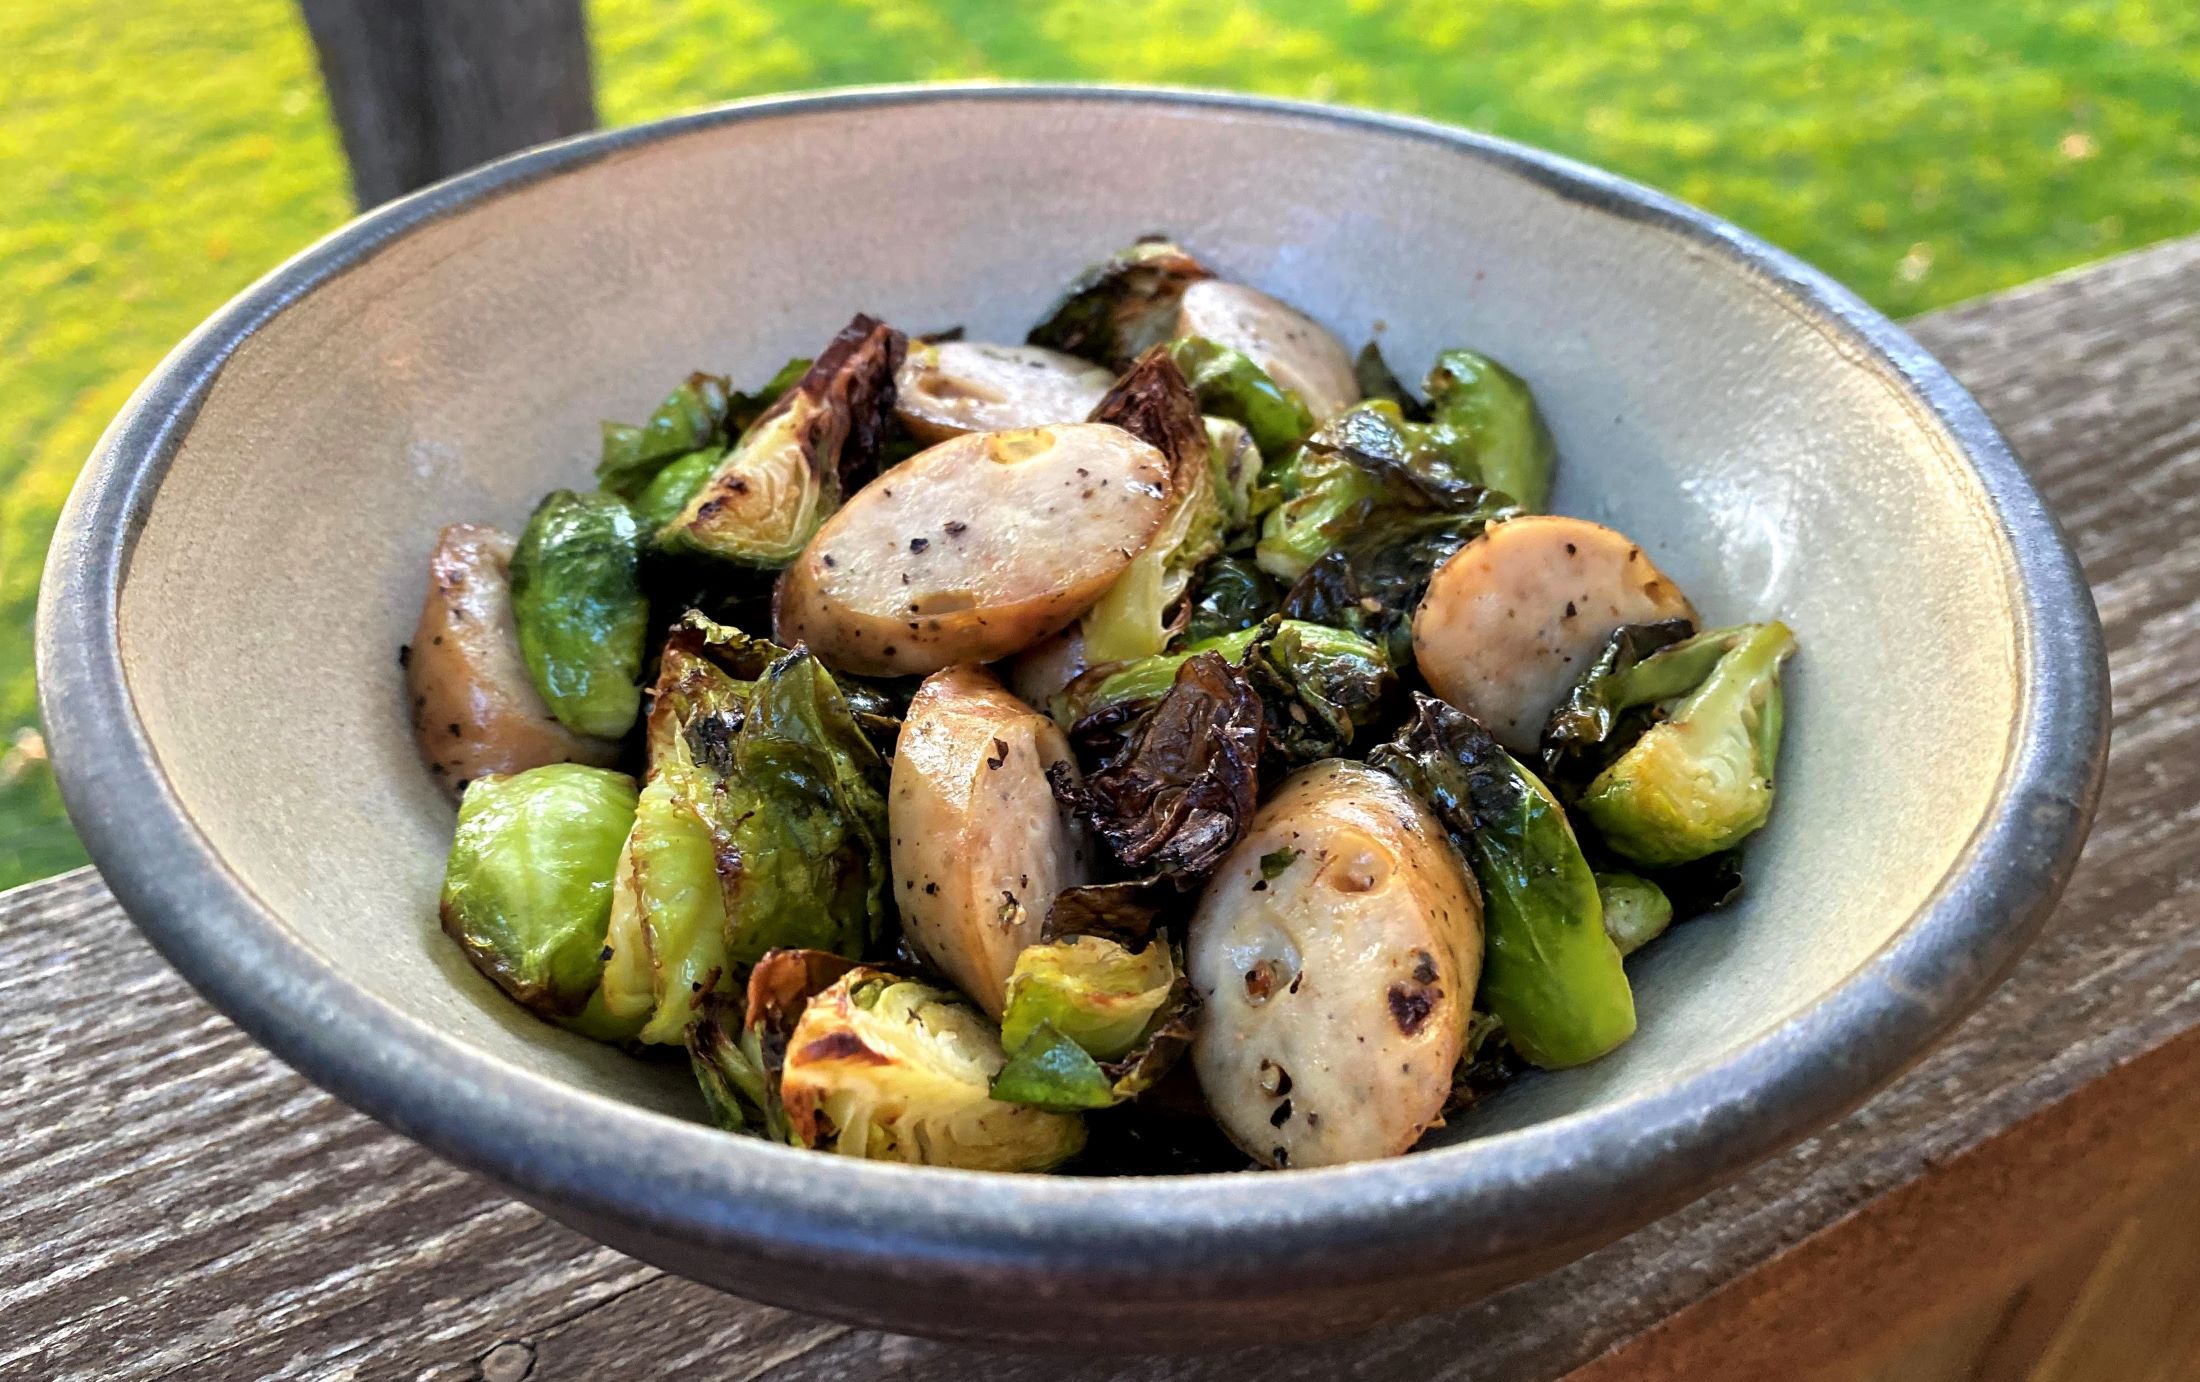 Chicken sausage in air fryer with brussels sprouts